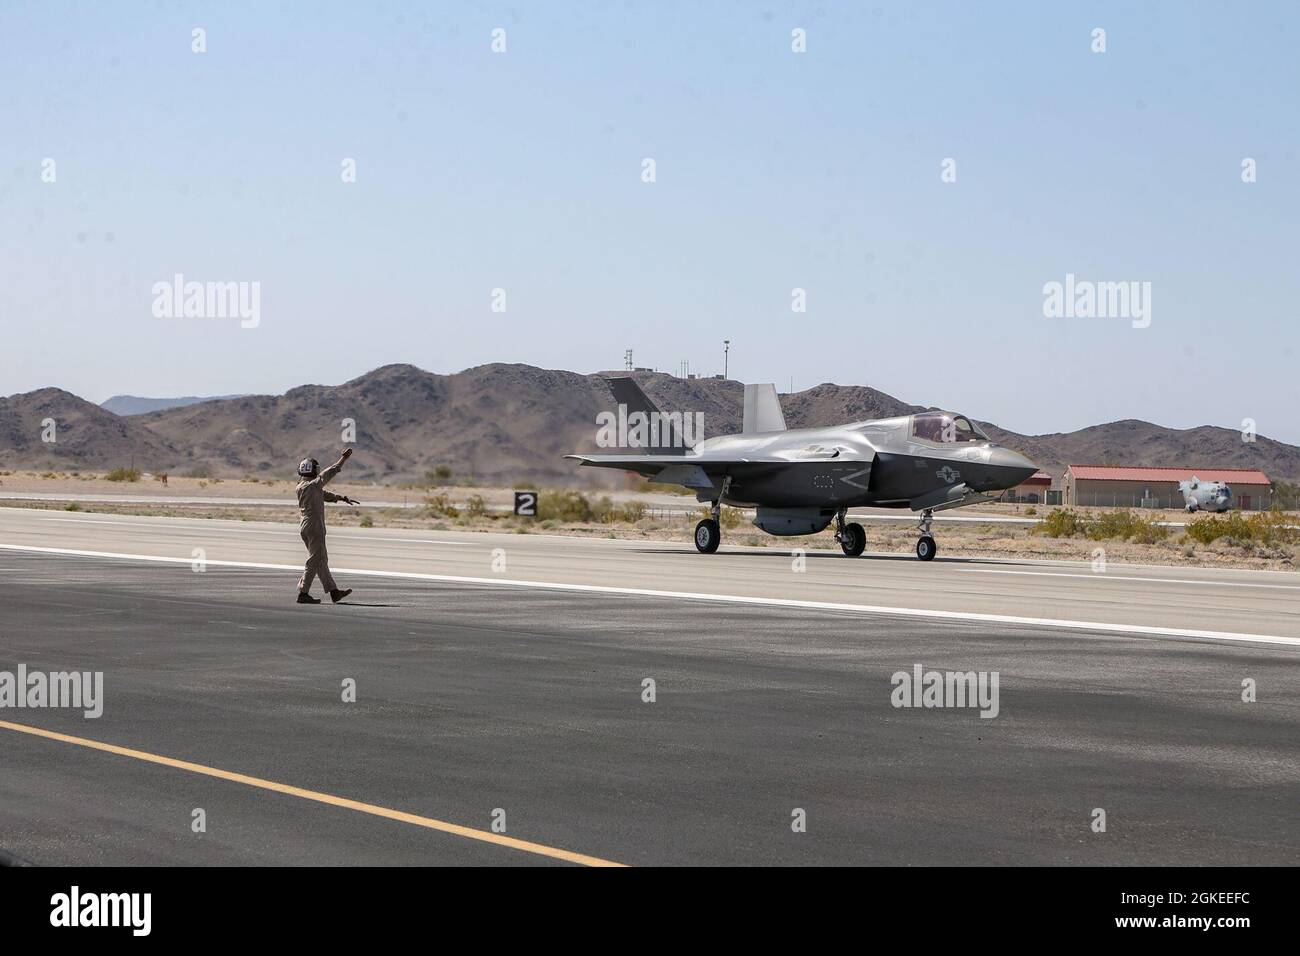 U.S. Marine Corps F-35B Lightning II, assigned to Marine Aviation Weapons and Tactics Squadron One (MAWTS-1), taxis the runway prior to a hot load exercise in support of Weapons and Tactics Instructor (WTI) course 2-21, at Laguna Army Air Field, Yuma, Ariz., March 30, 2021. The WTI course is a seven-week training event hosted by MAWTS-1, providing standardized advanced tactical training and certification of unit instructor qualifications to support Marine aviation training and readiness, and assists in developing and employing aviation weapons and tactics. Stock Photo